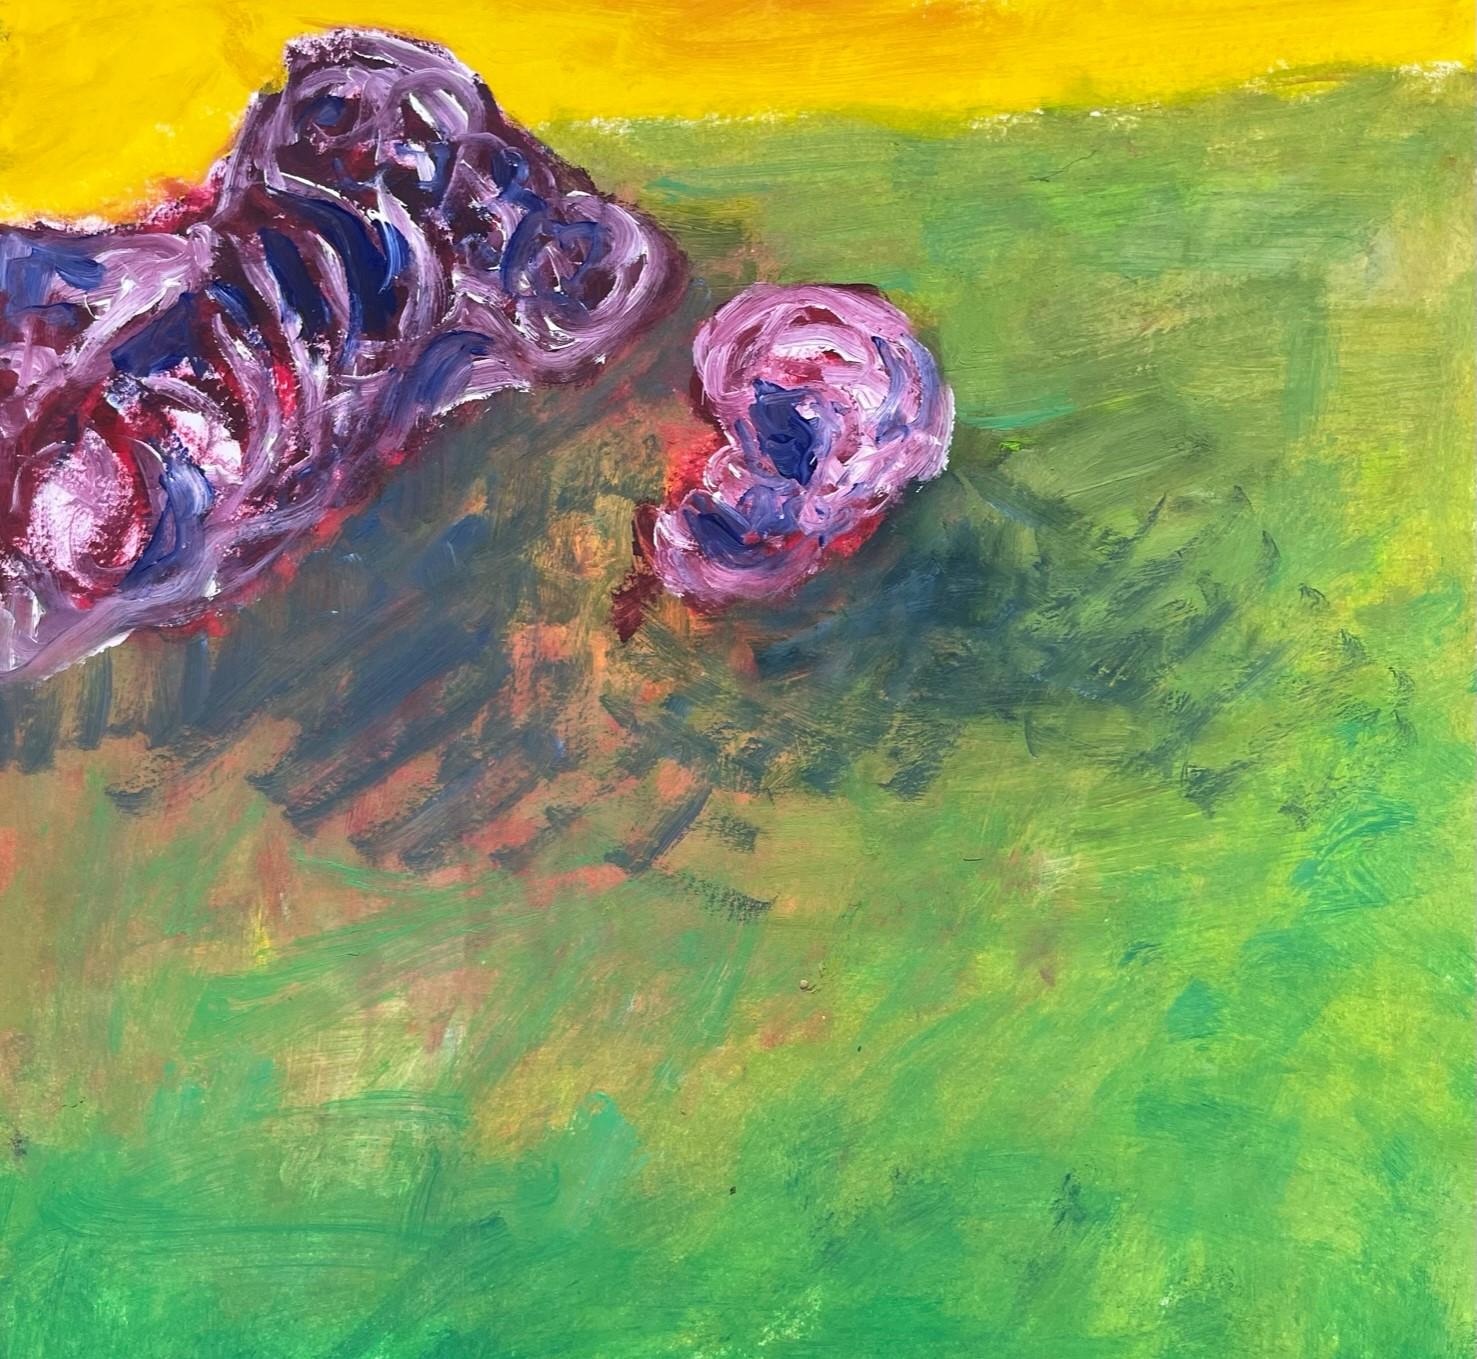 Remains (Body in the Field 14), 2022
oil on paper
16 17/32 h x 11 13/16 w in.
42 H x 30 W cm

Zsolt Berszán embodies in his works the dissolution of the human body through the prism of the fragment, the body in pieces, and the skeletal carcass. It